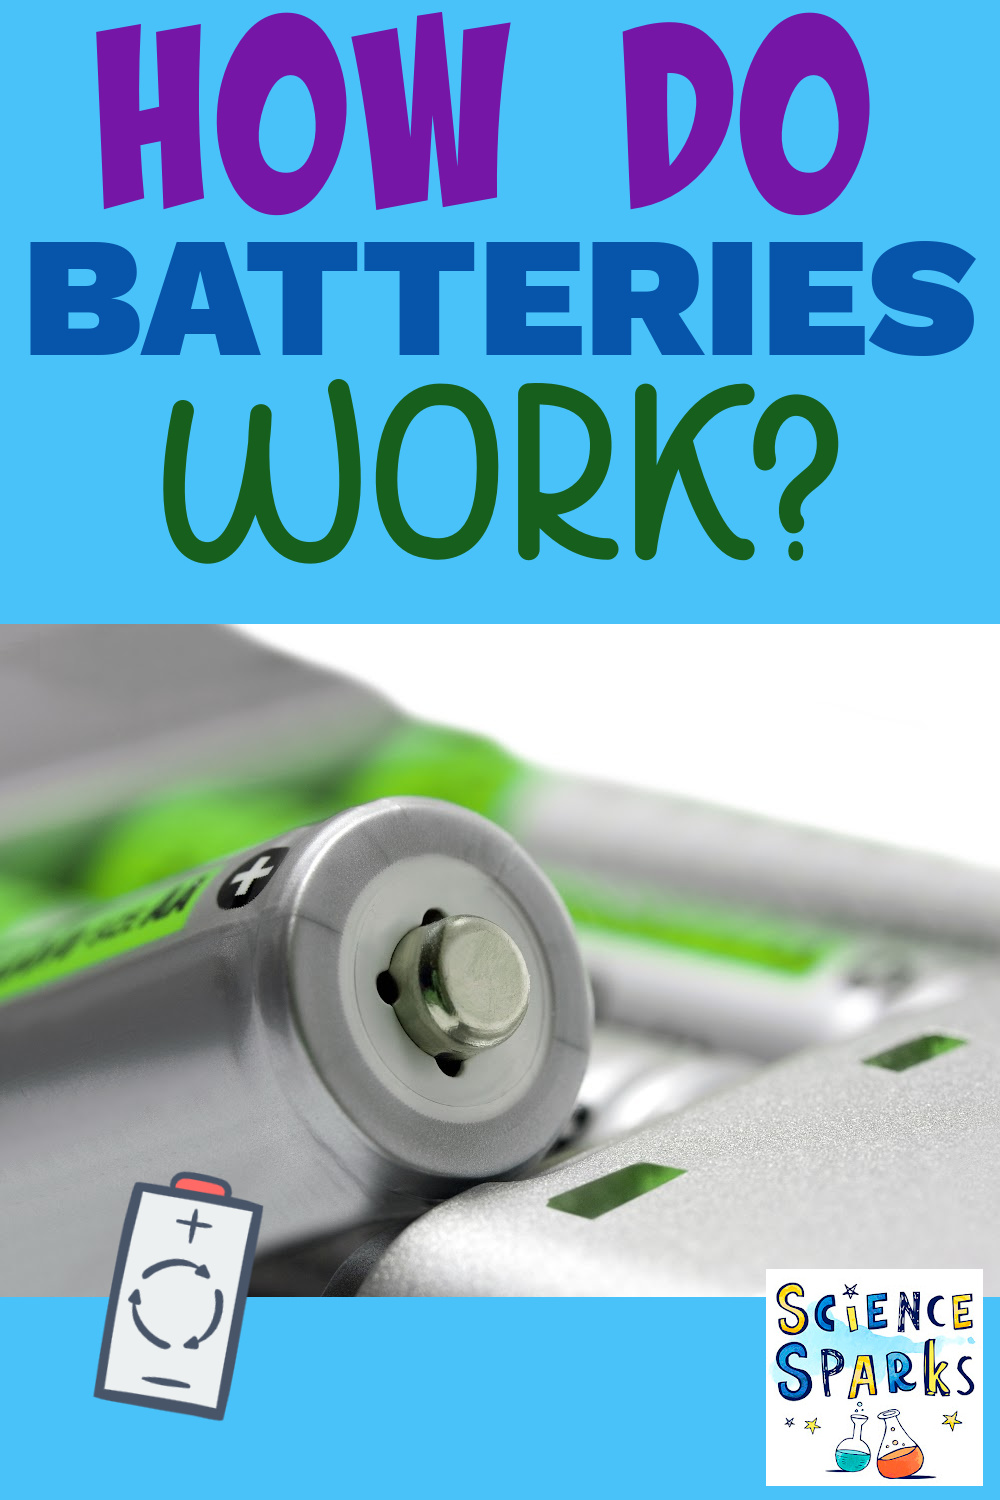 Image of a battery and text - How do batteries work